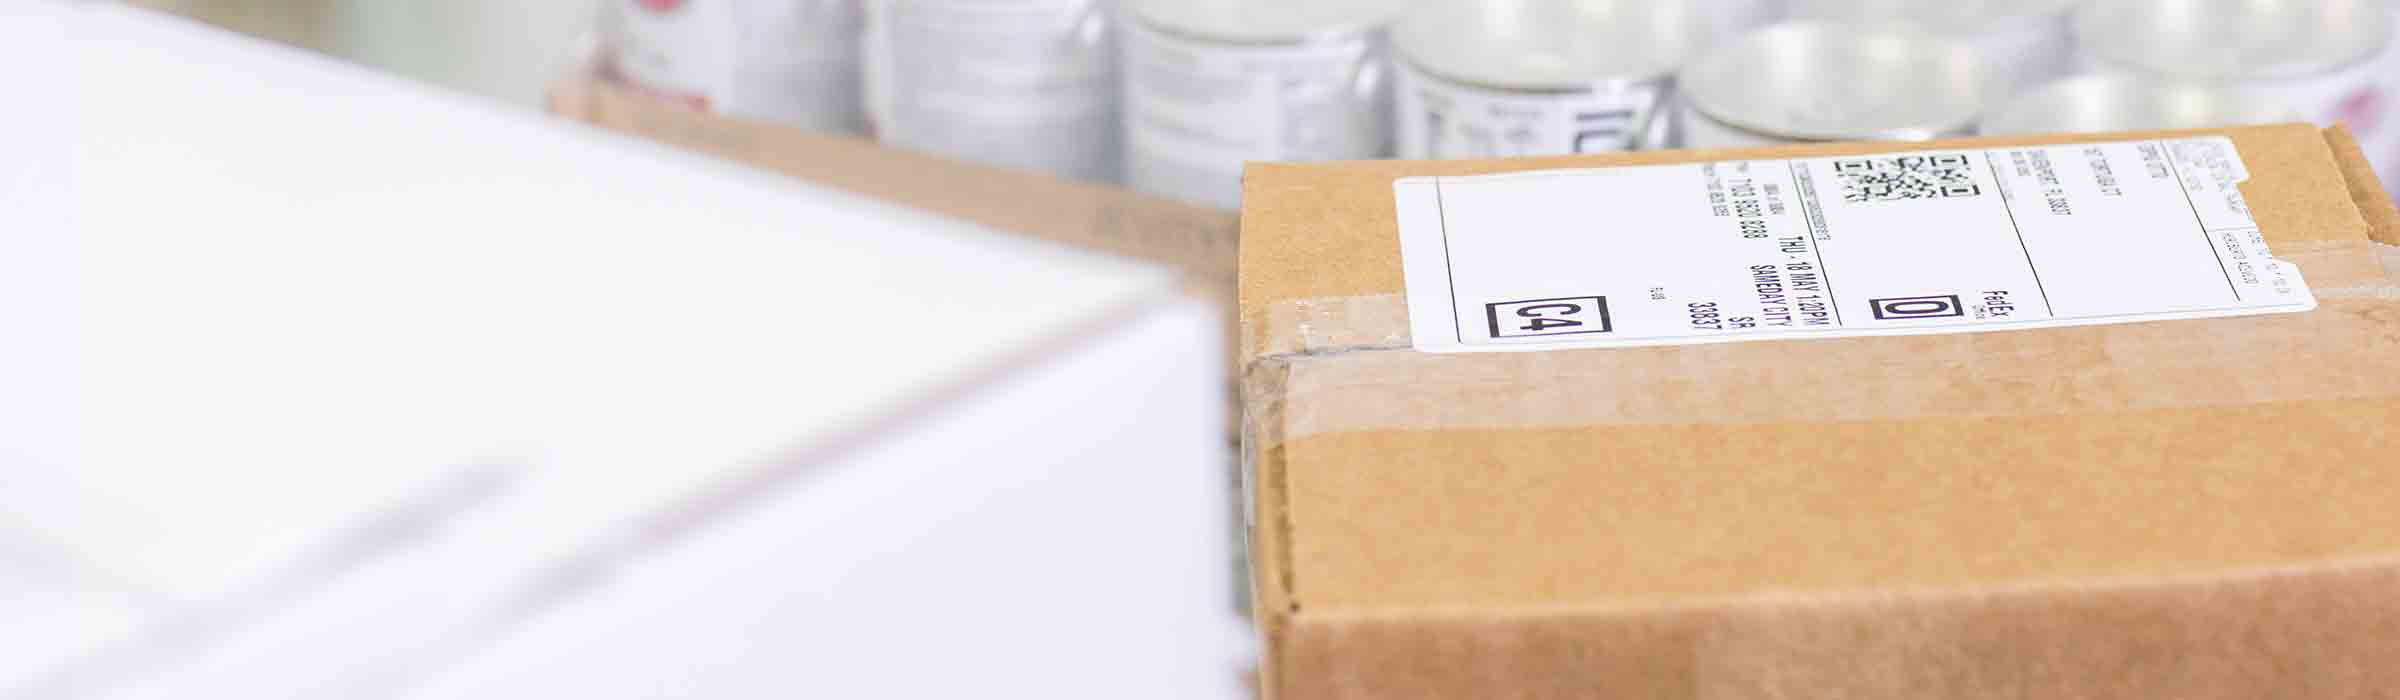 How To Complete Shipping Labels And Shipping Documents | Fedex Throughout Fedex Label Template Word